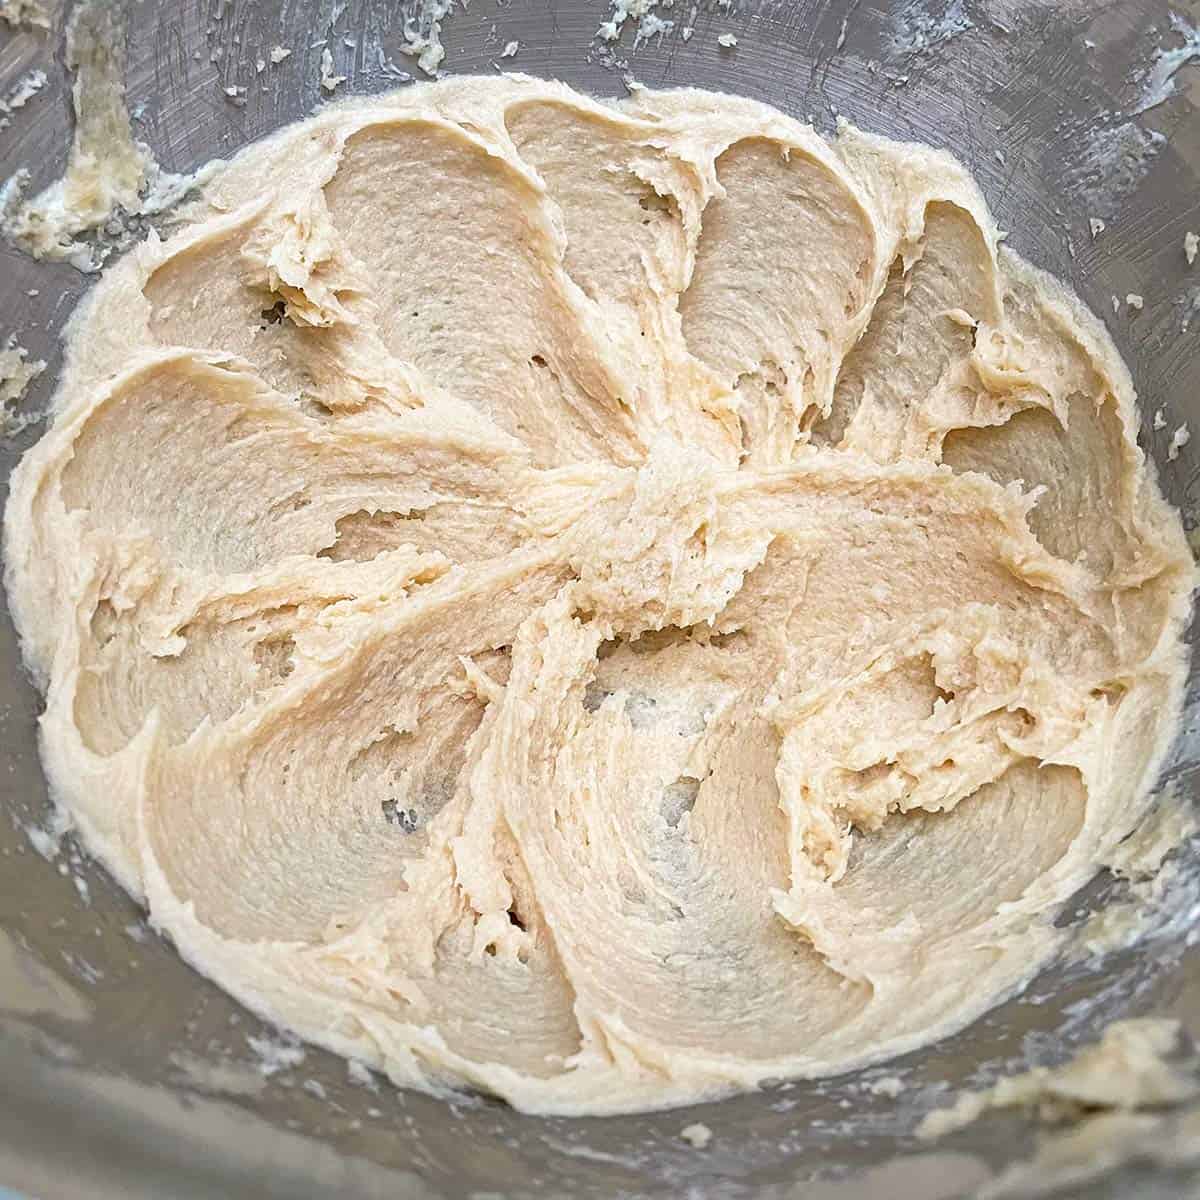 Creamed butter and light brown sugar mixed for 3 minutes in a mixer bowl.